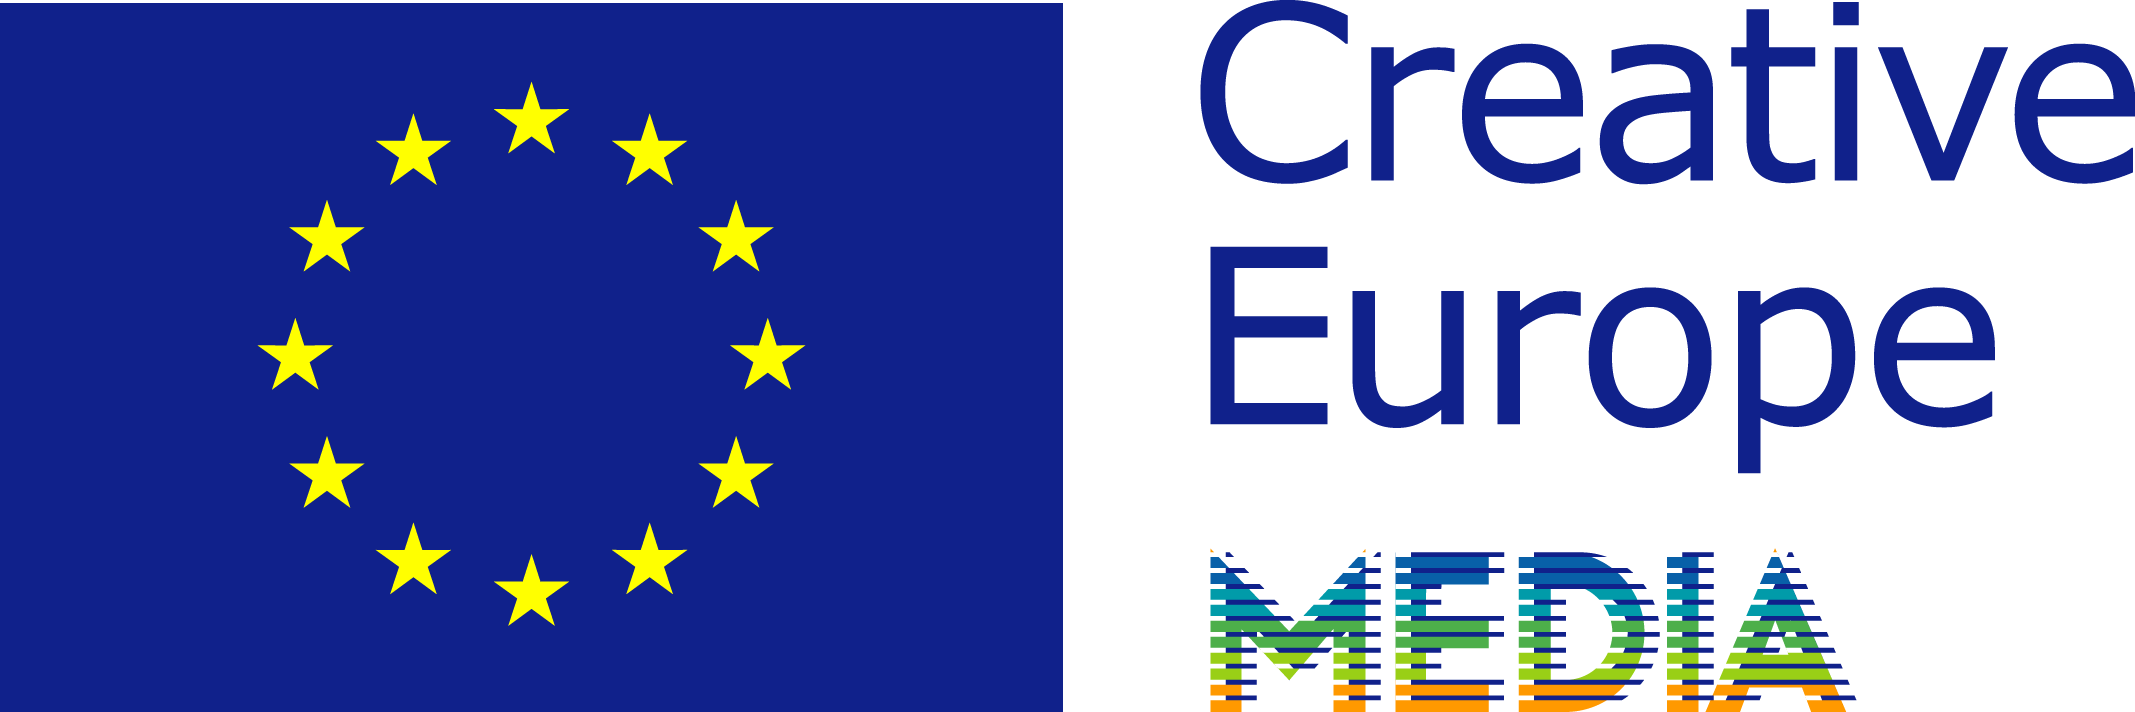 Co-funded by the creative europe MEDIA programme of the european union